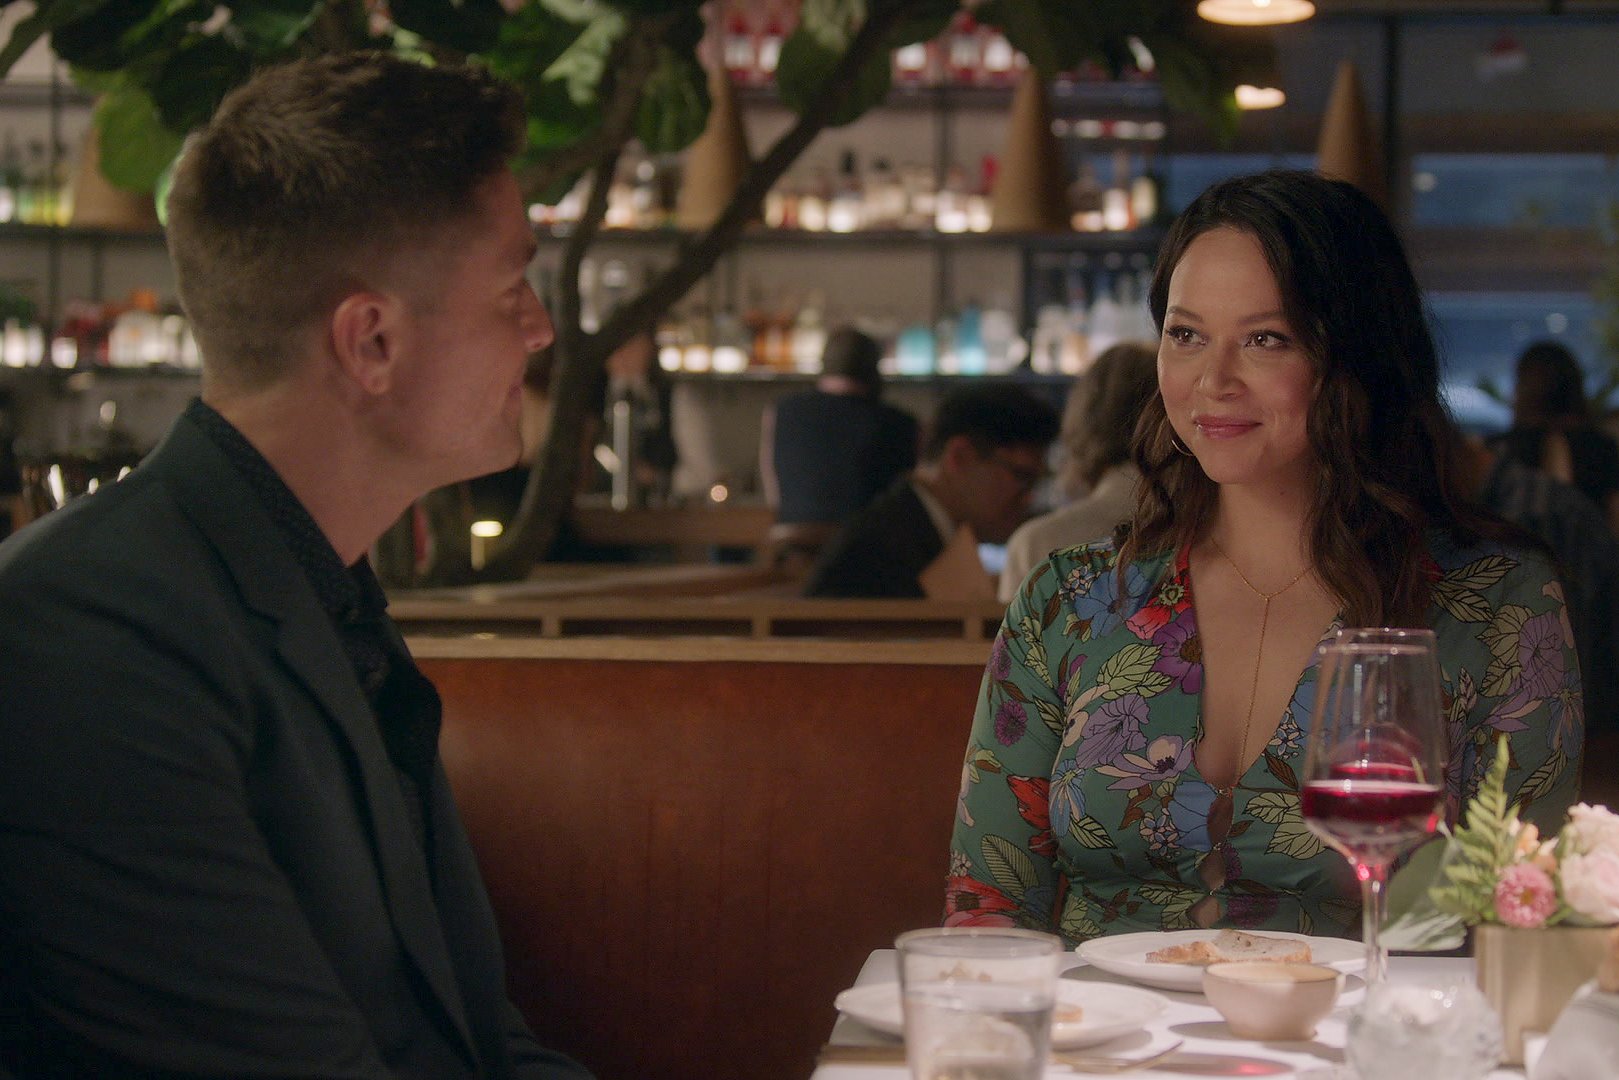 Eric Winter and Melissa O'Neil, in character as Tim Bradford and Lucy Chen, share a scene at a restaurant in 'The Rookie' Season 5 Episode 10, 'The List,' on ABC. Tim wears a black suit. Lucy wears a green dress with multi-colored flowers on it.